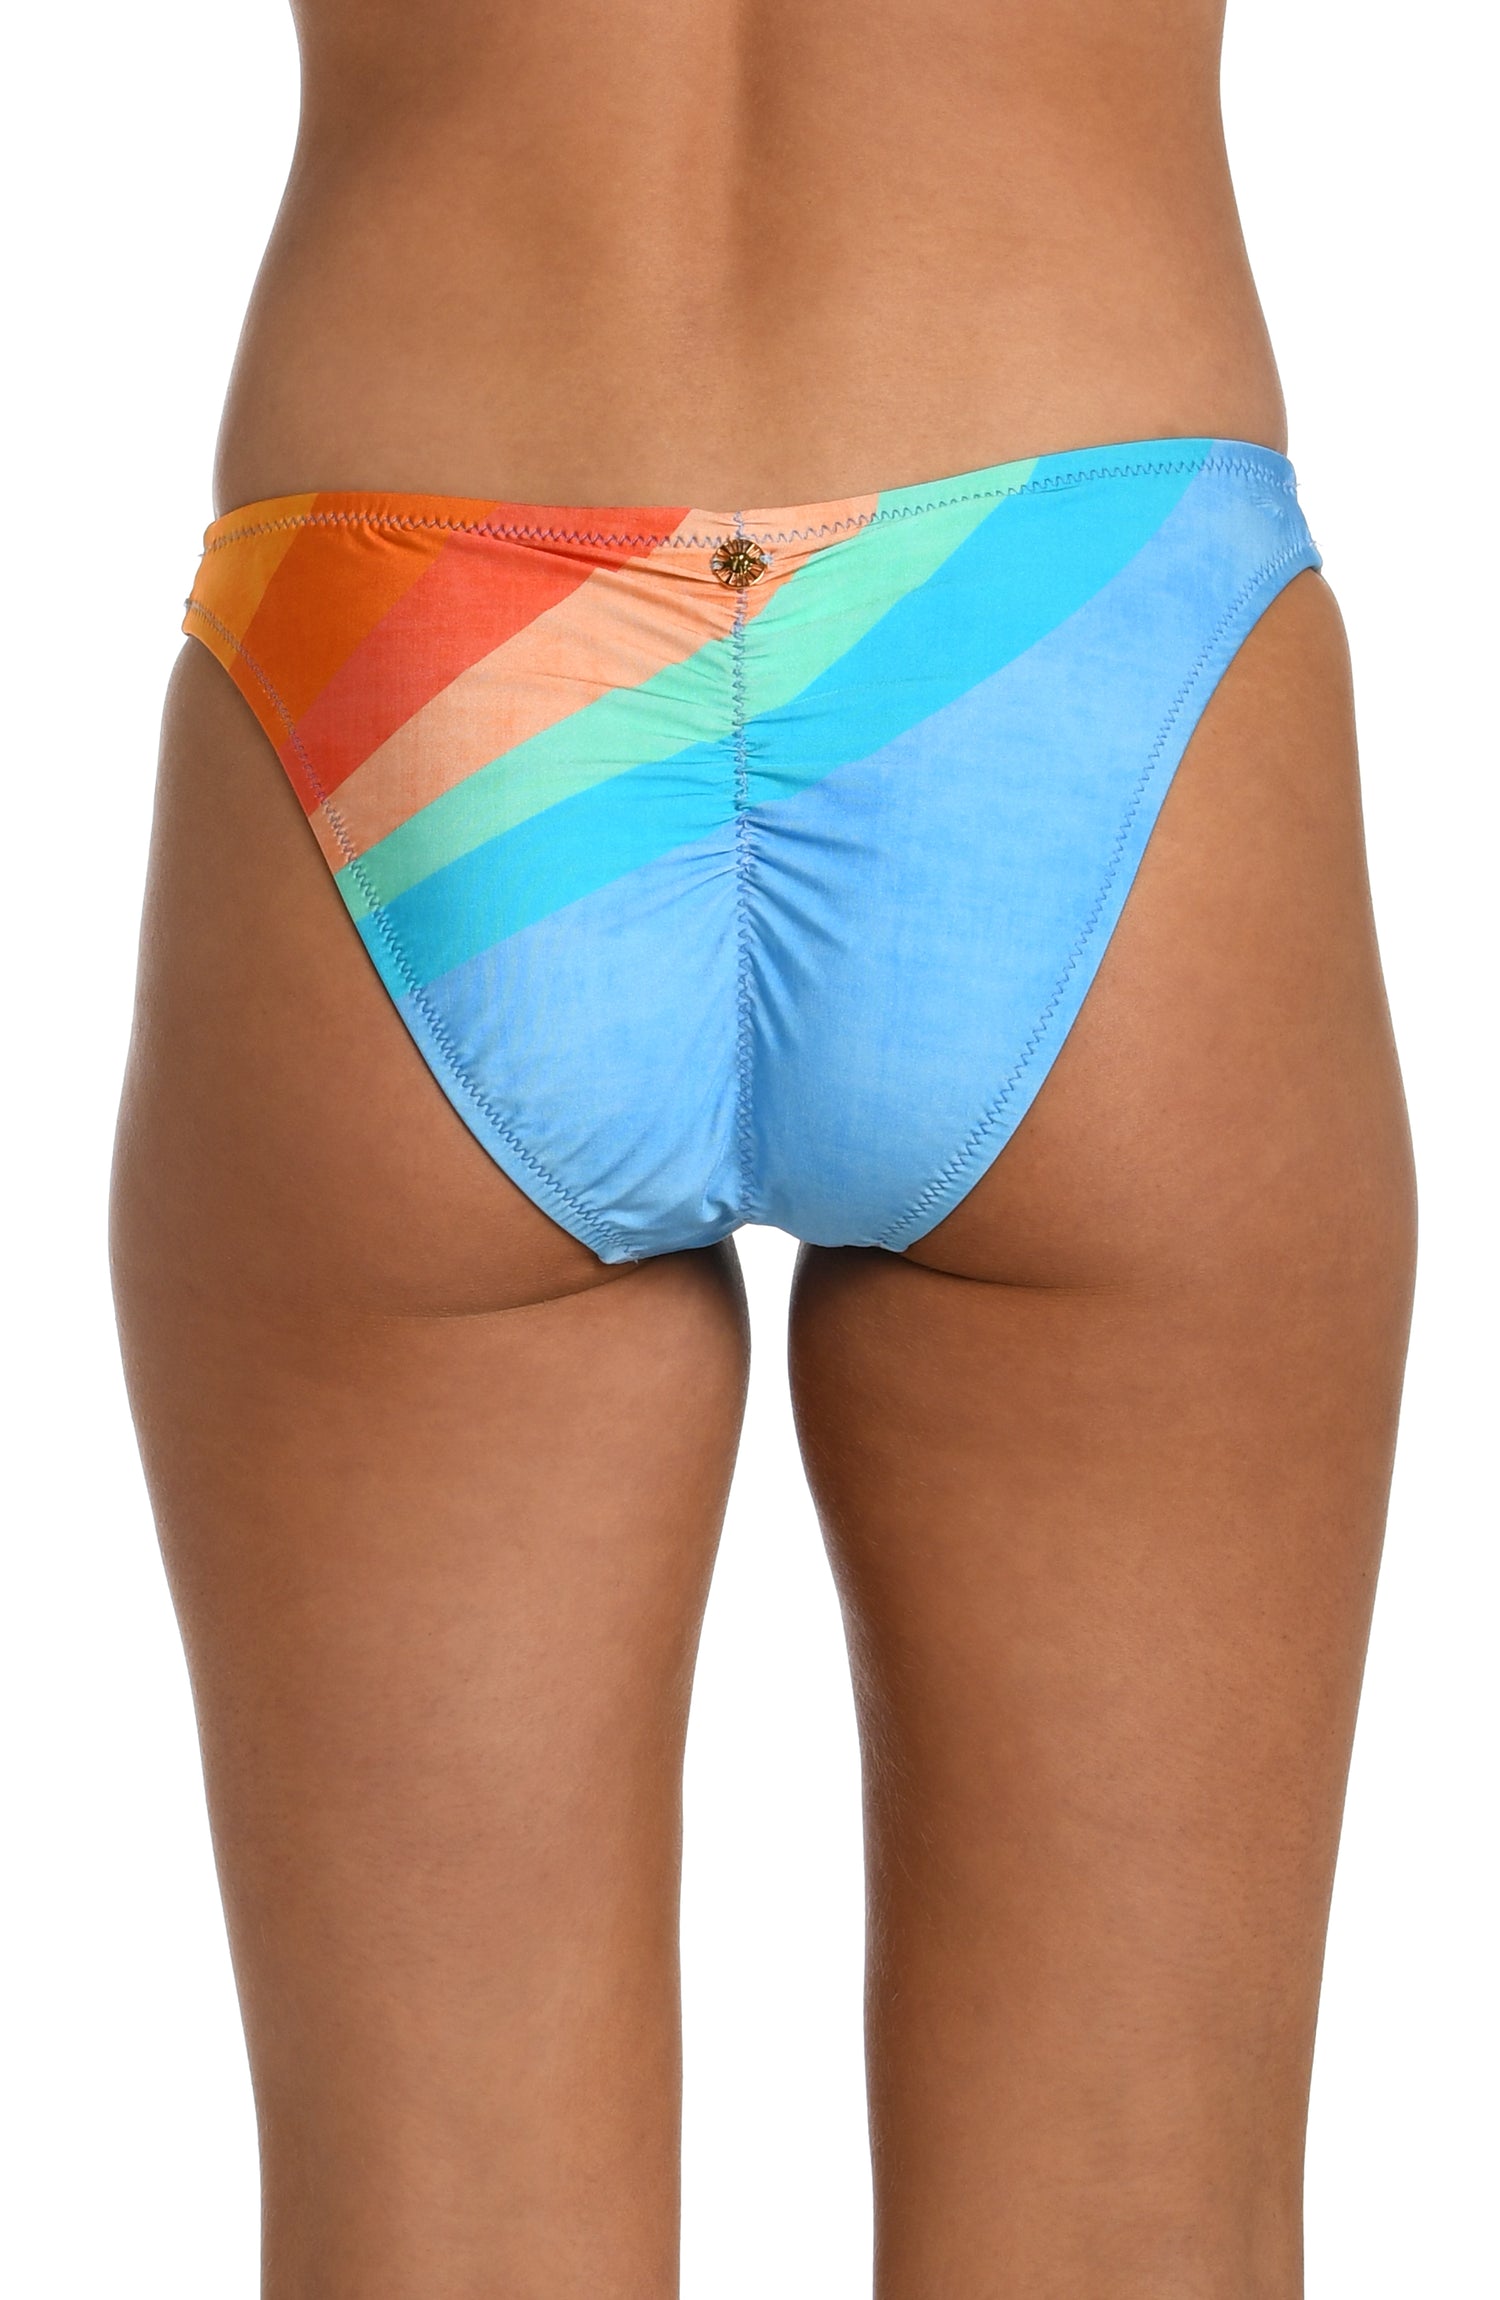 Model is wearing an orange and blue multicolored retro printed french cut bikini bottom from our Mod Block collection.